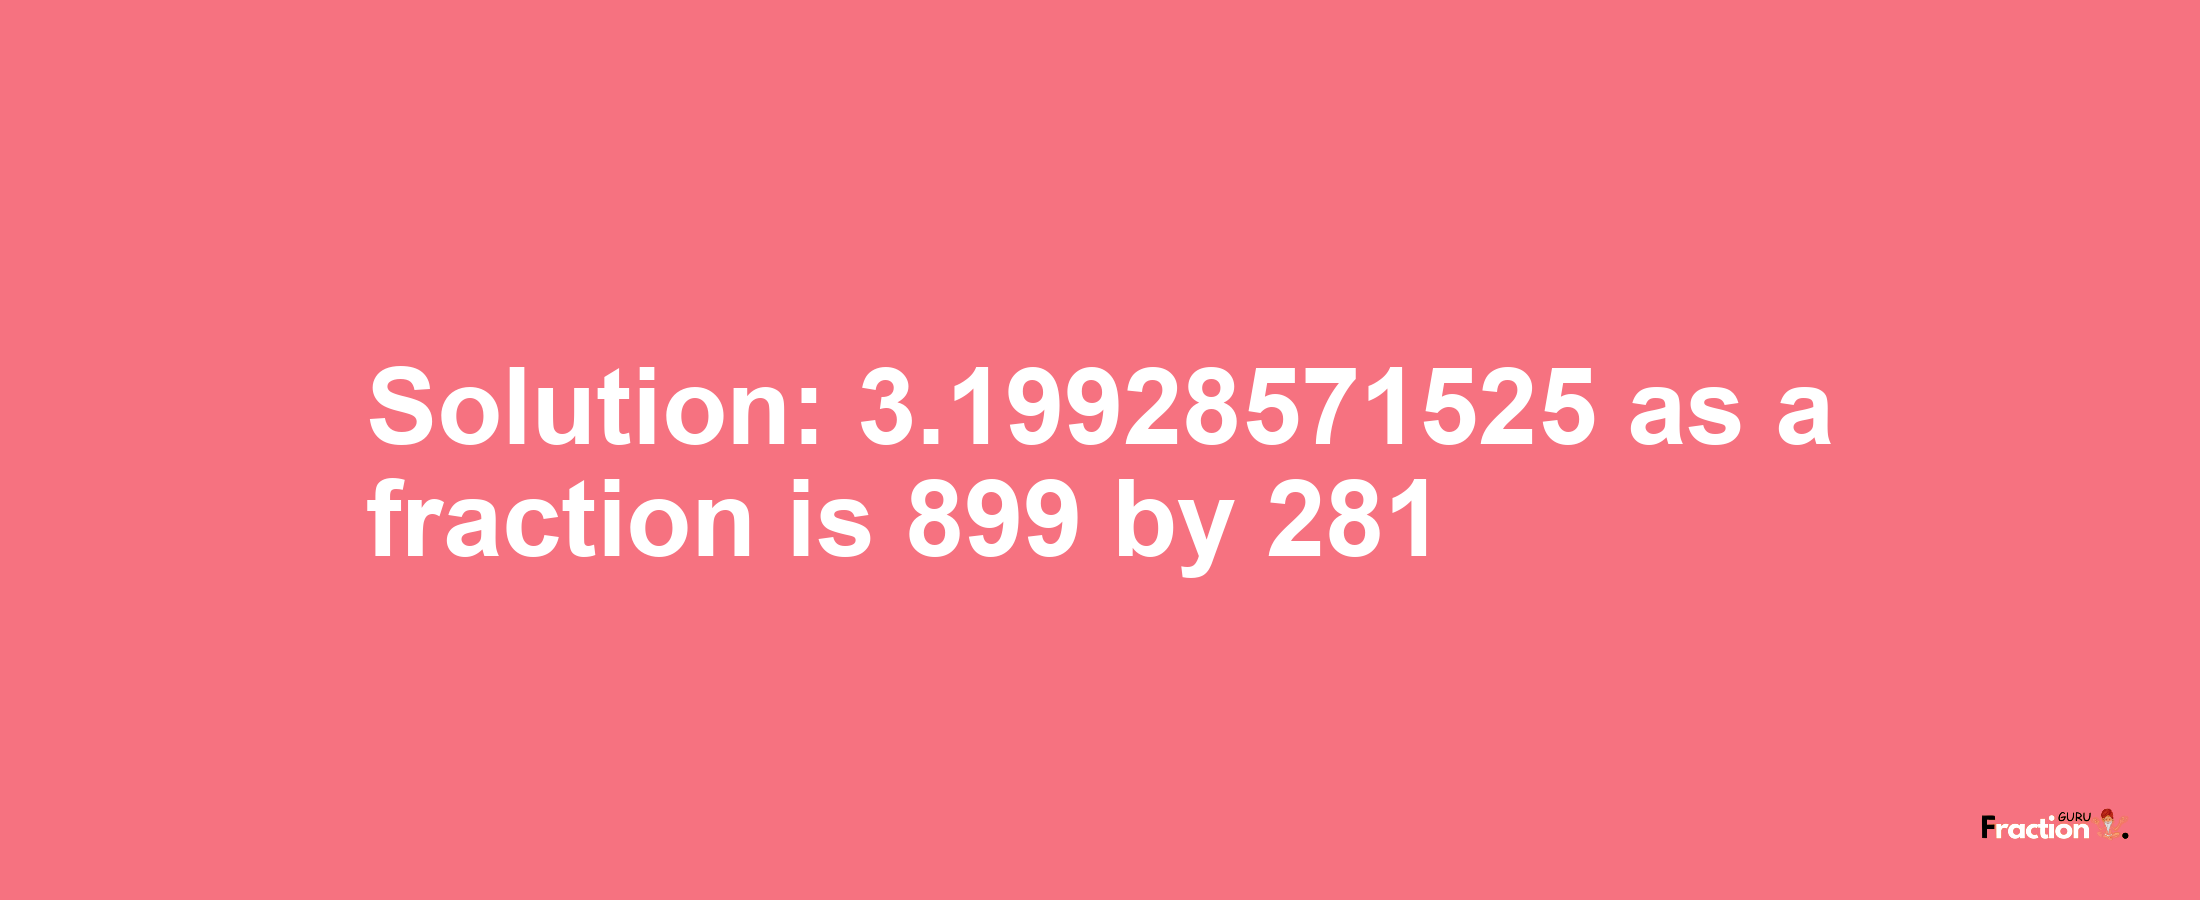 Solution:3.19928571525 as a fraction is 899/281